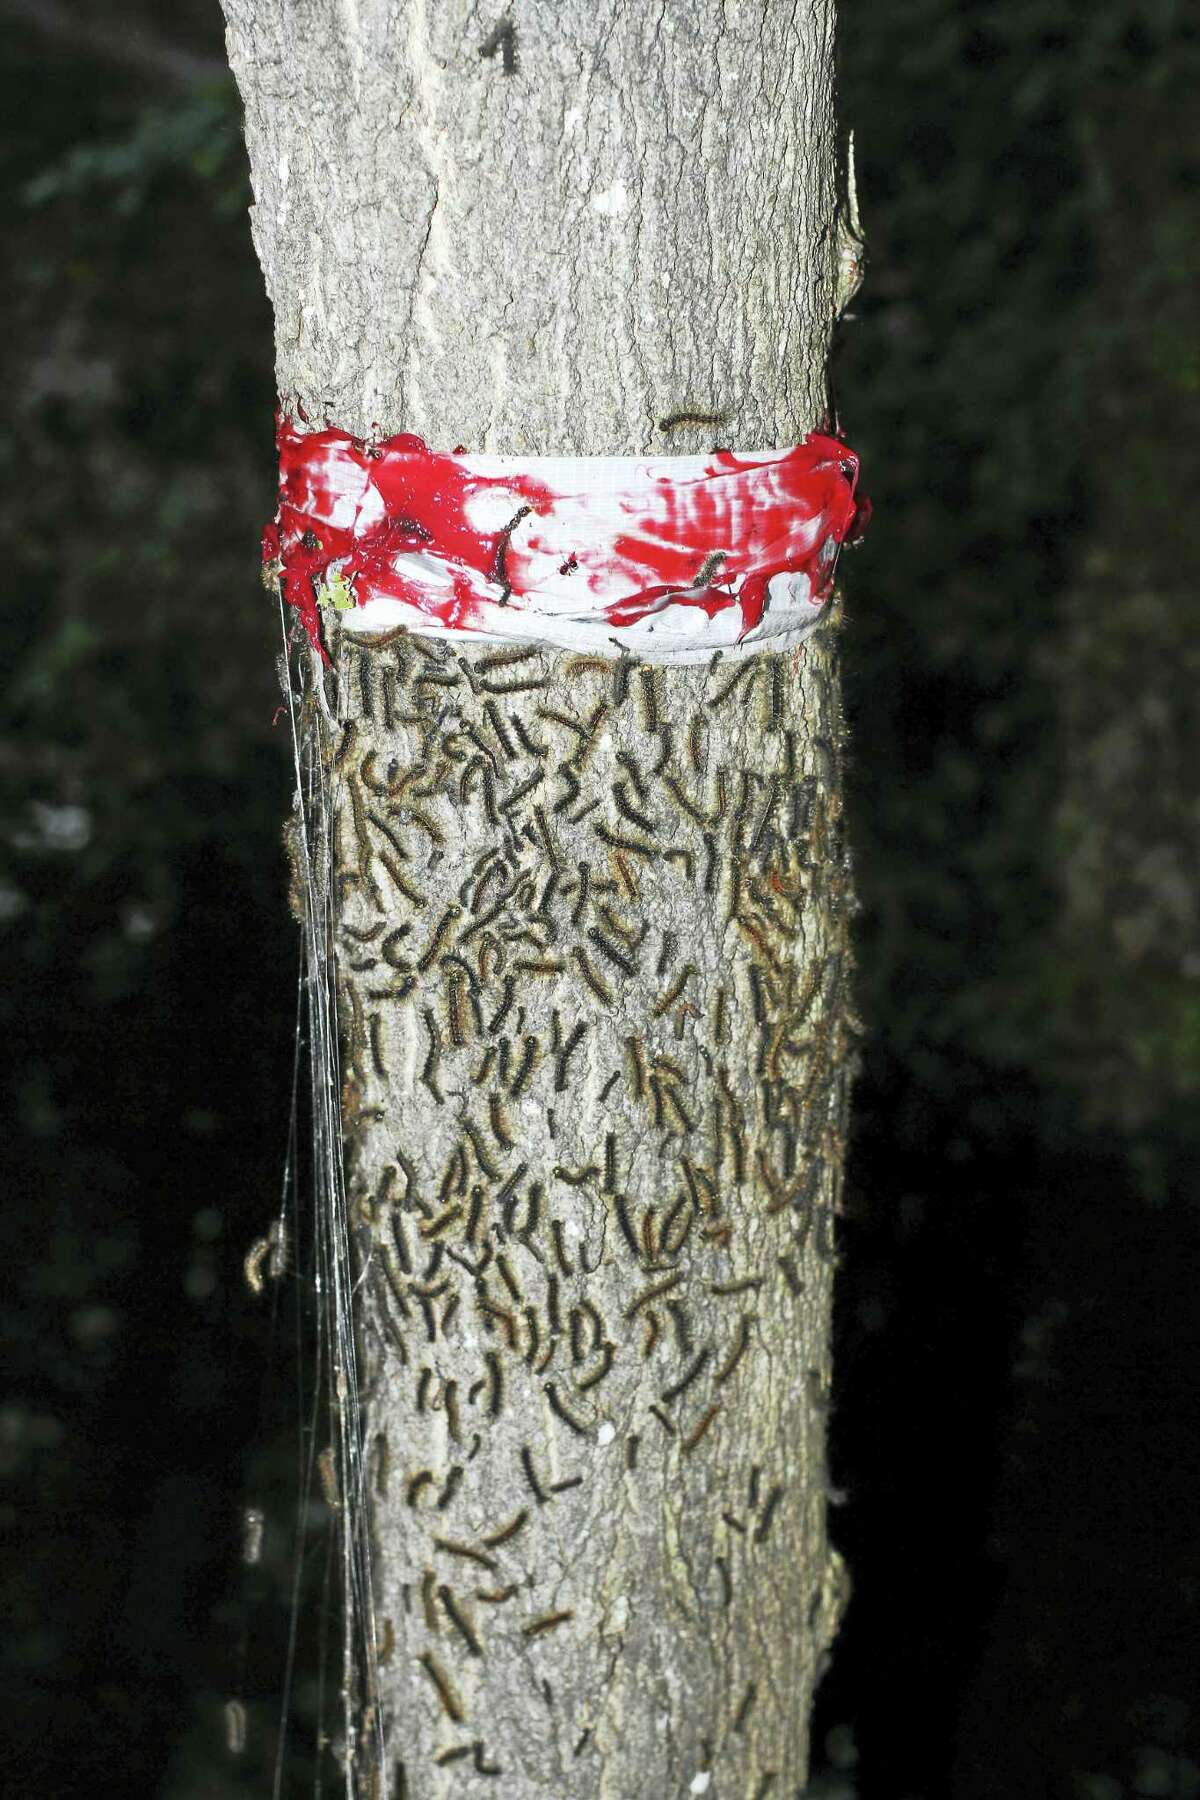 Jim Rossi of Durham said he was able to stop an infestation of one tree on Arbutus Street in Middletown by using duct tape wound around the trunk with the sticky side out and wheel-bearing grease on top of it. The effect was an army of caterpillars below the strip, several stuck on the tape, and only a couple above it.